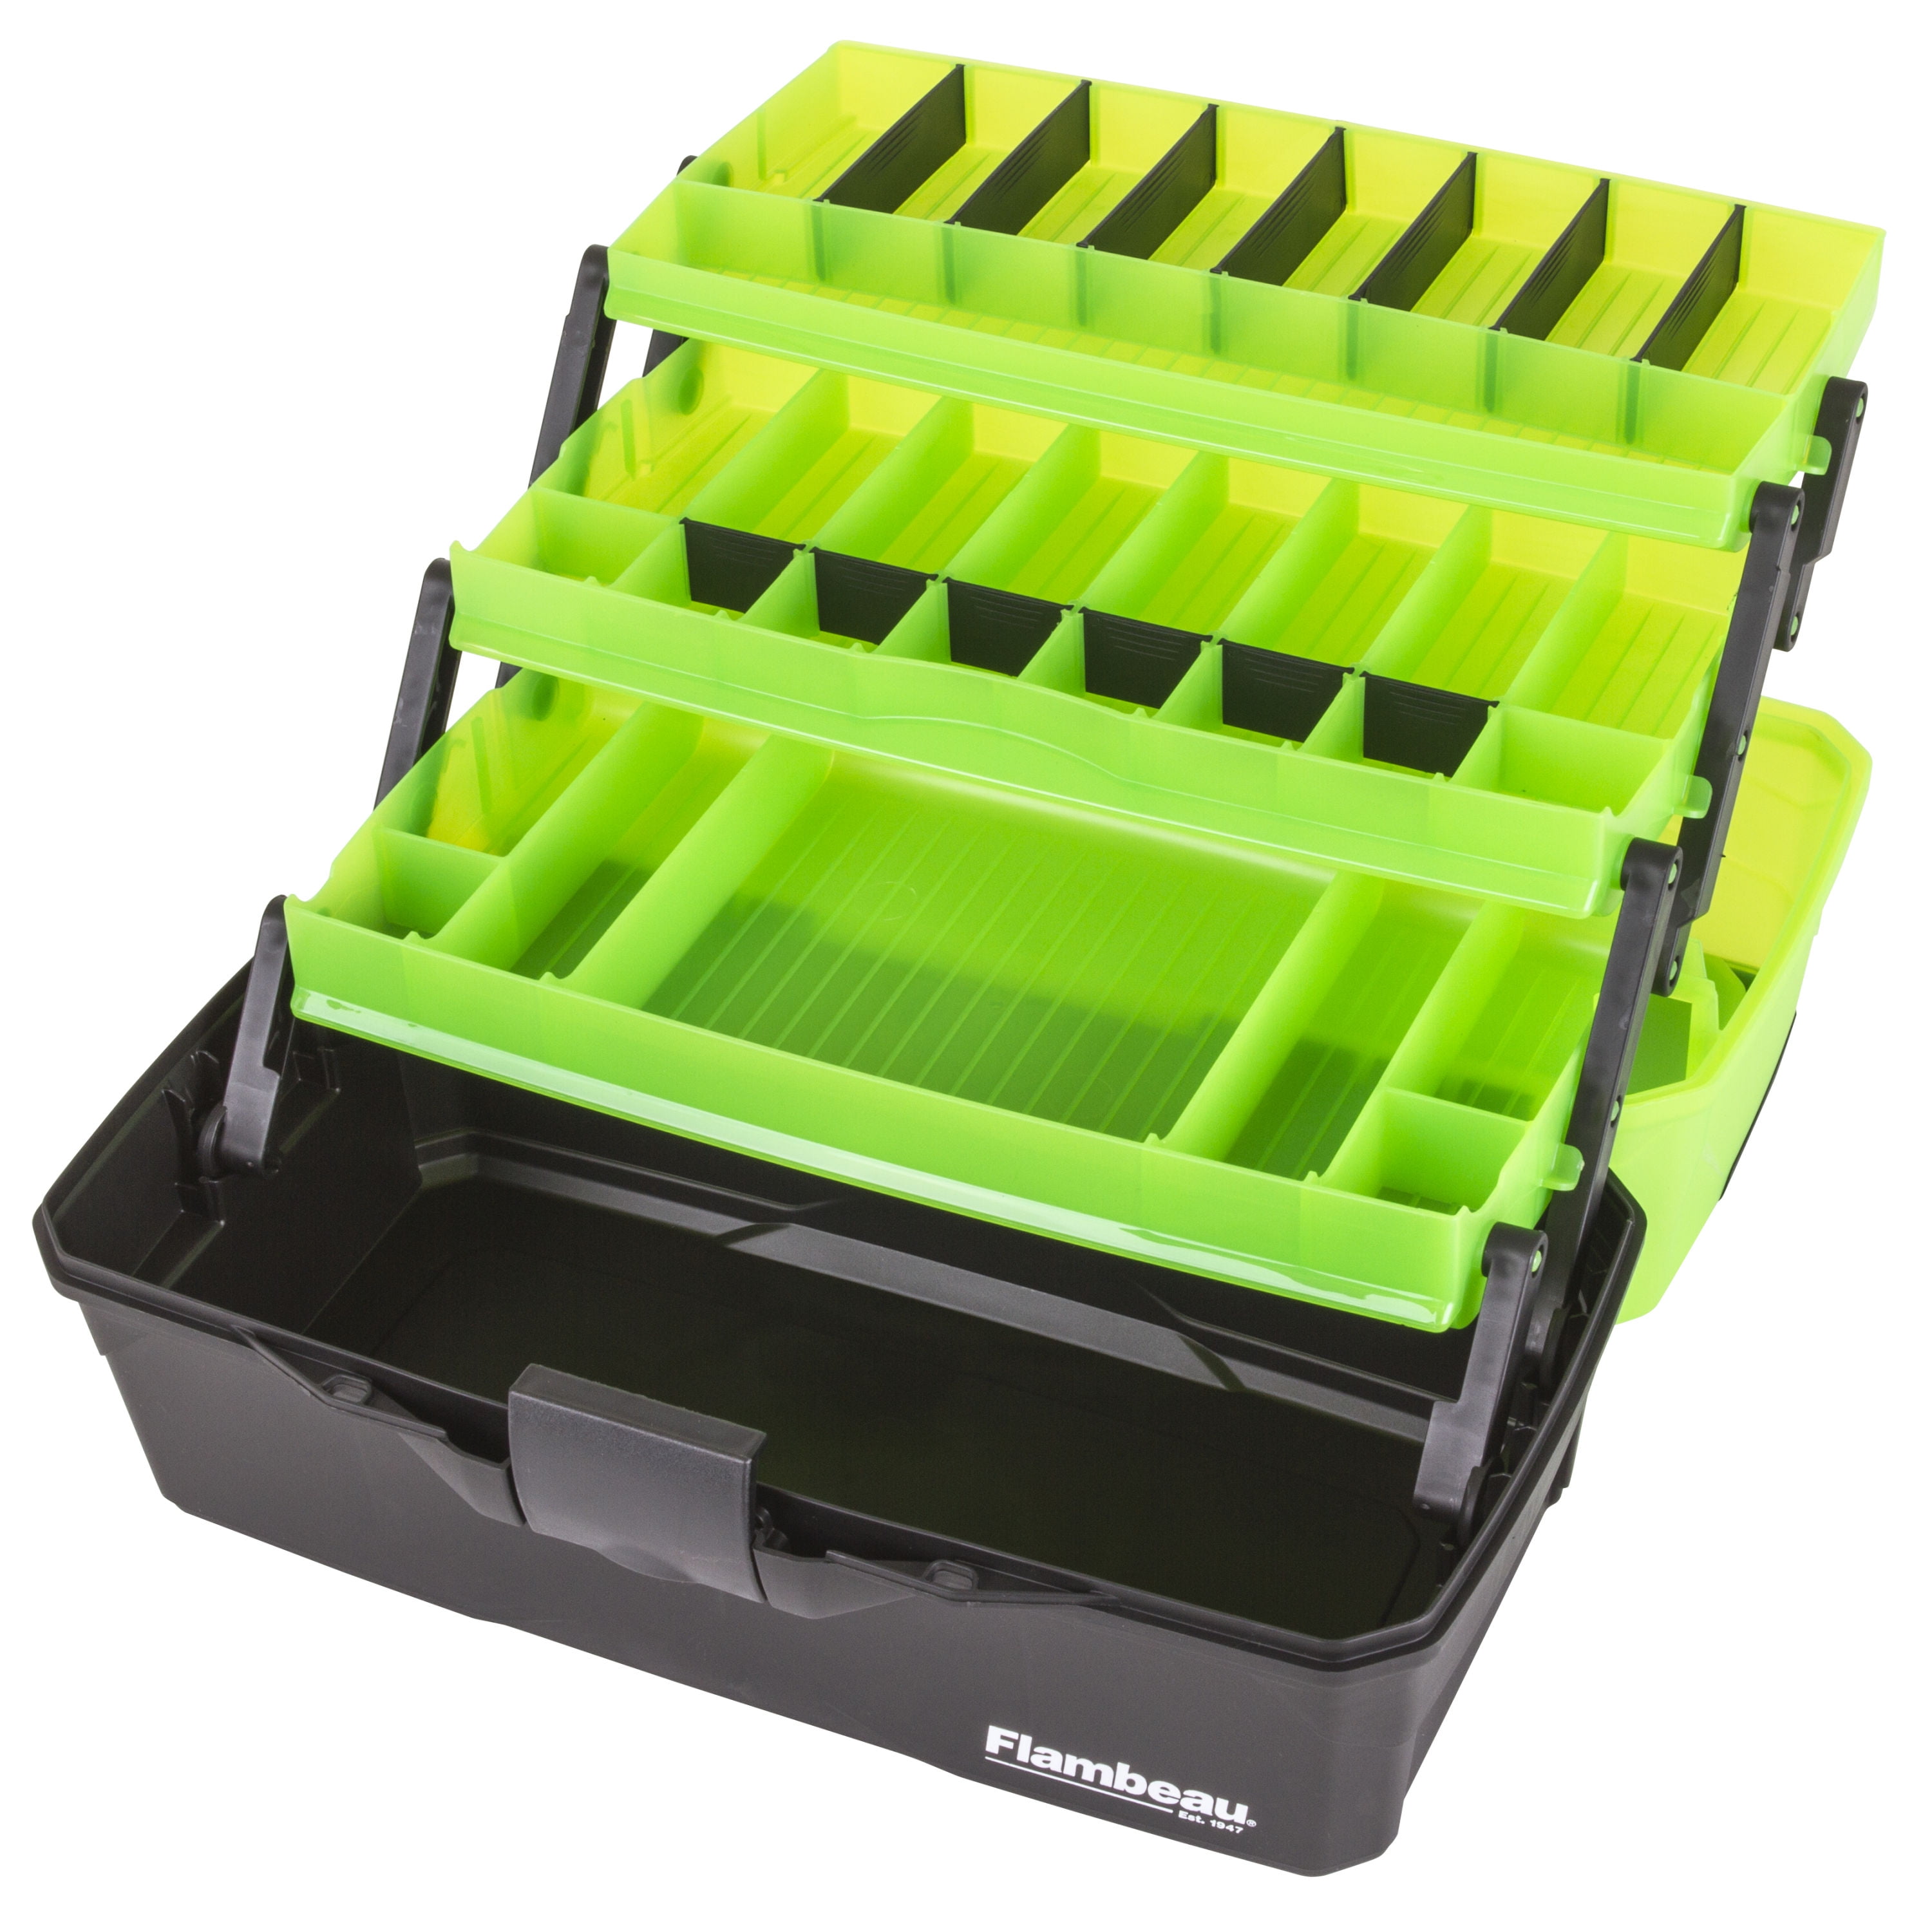 Flambeau 6383FG Tackle Boxes Fishing 3 Tray Anglers Outdoors Storage Dividers for sale online 